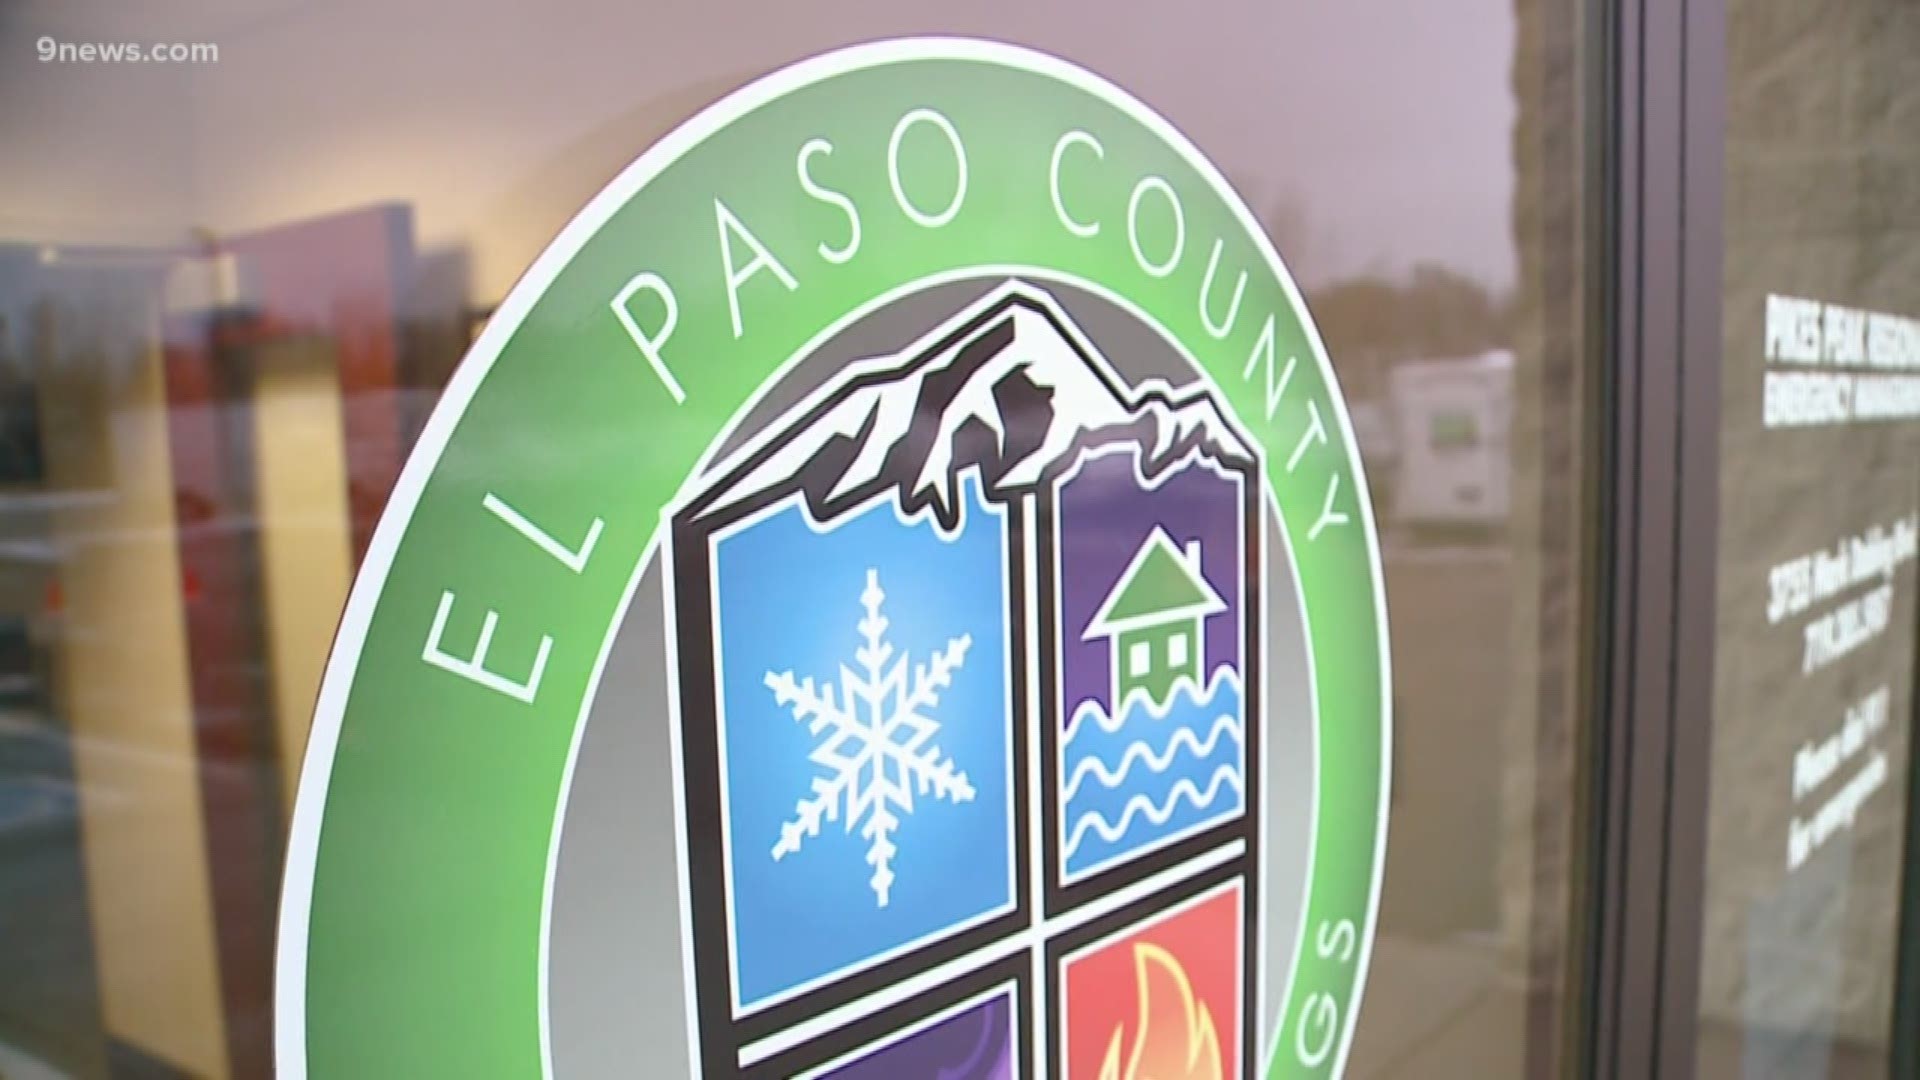 An El Paso County deputy died of COVID-19. He was 41 years old, and leaves behind his wife.